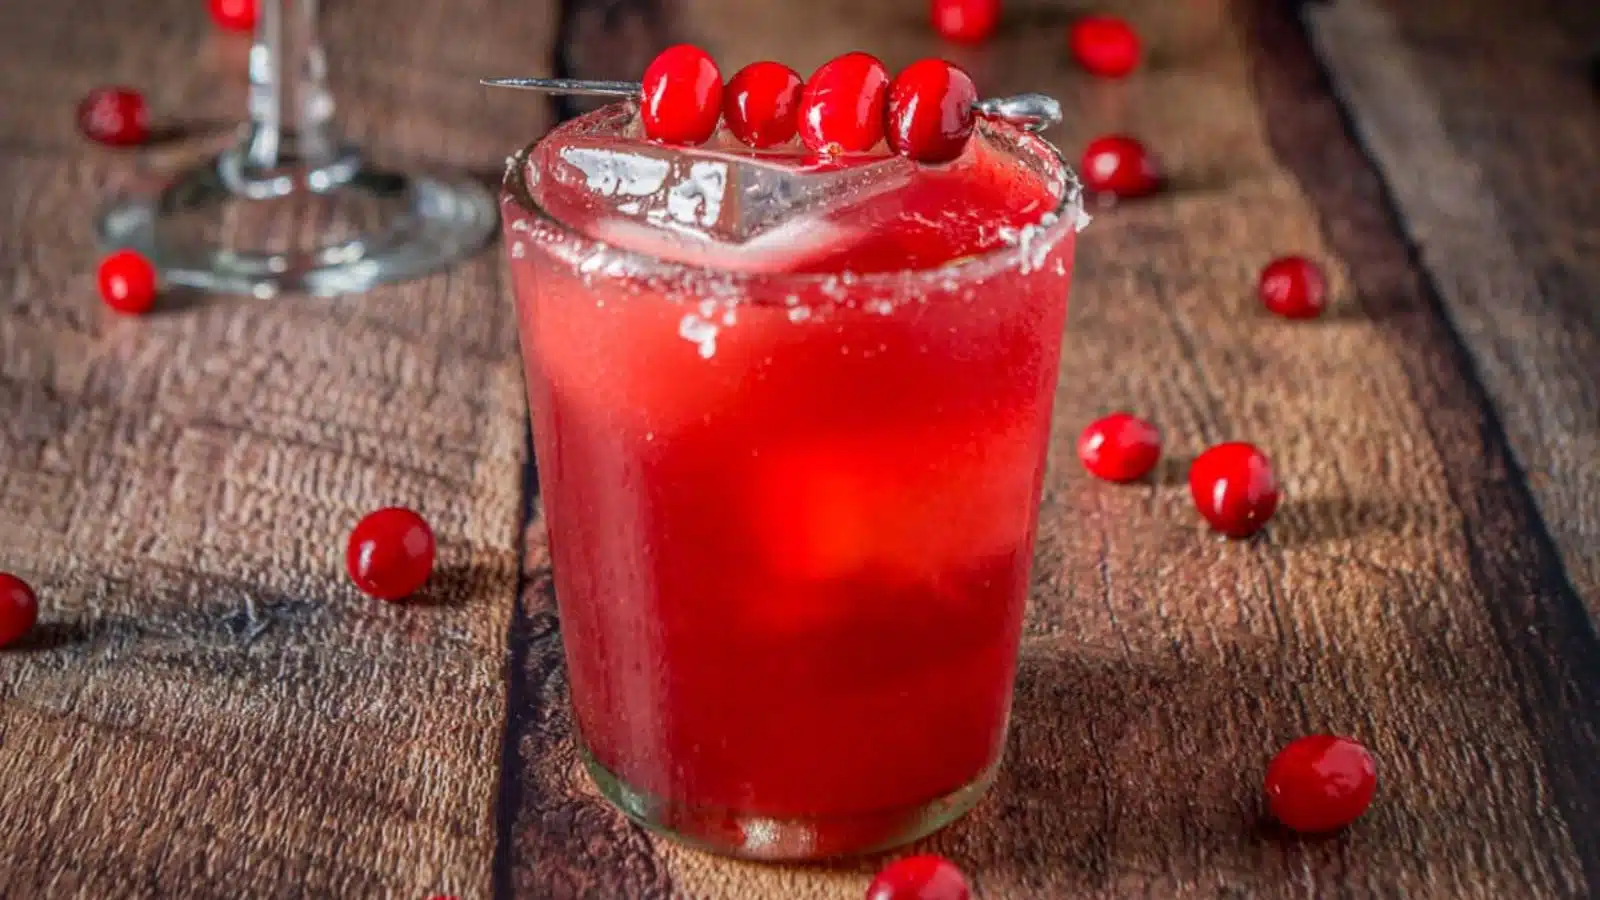 A double old fashioned glass filled with the cranberry drink with cranberries on the table and as garnish